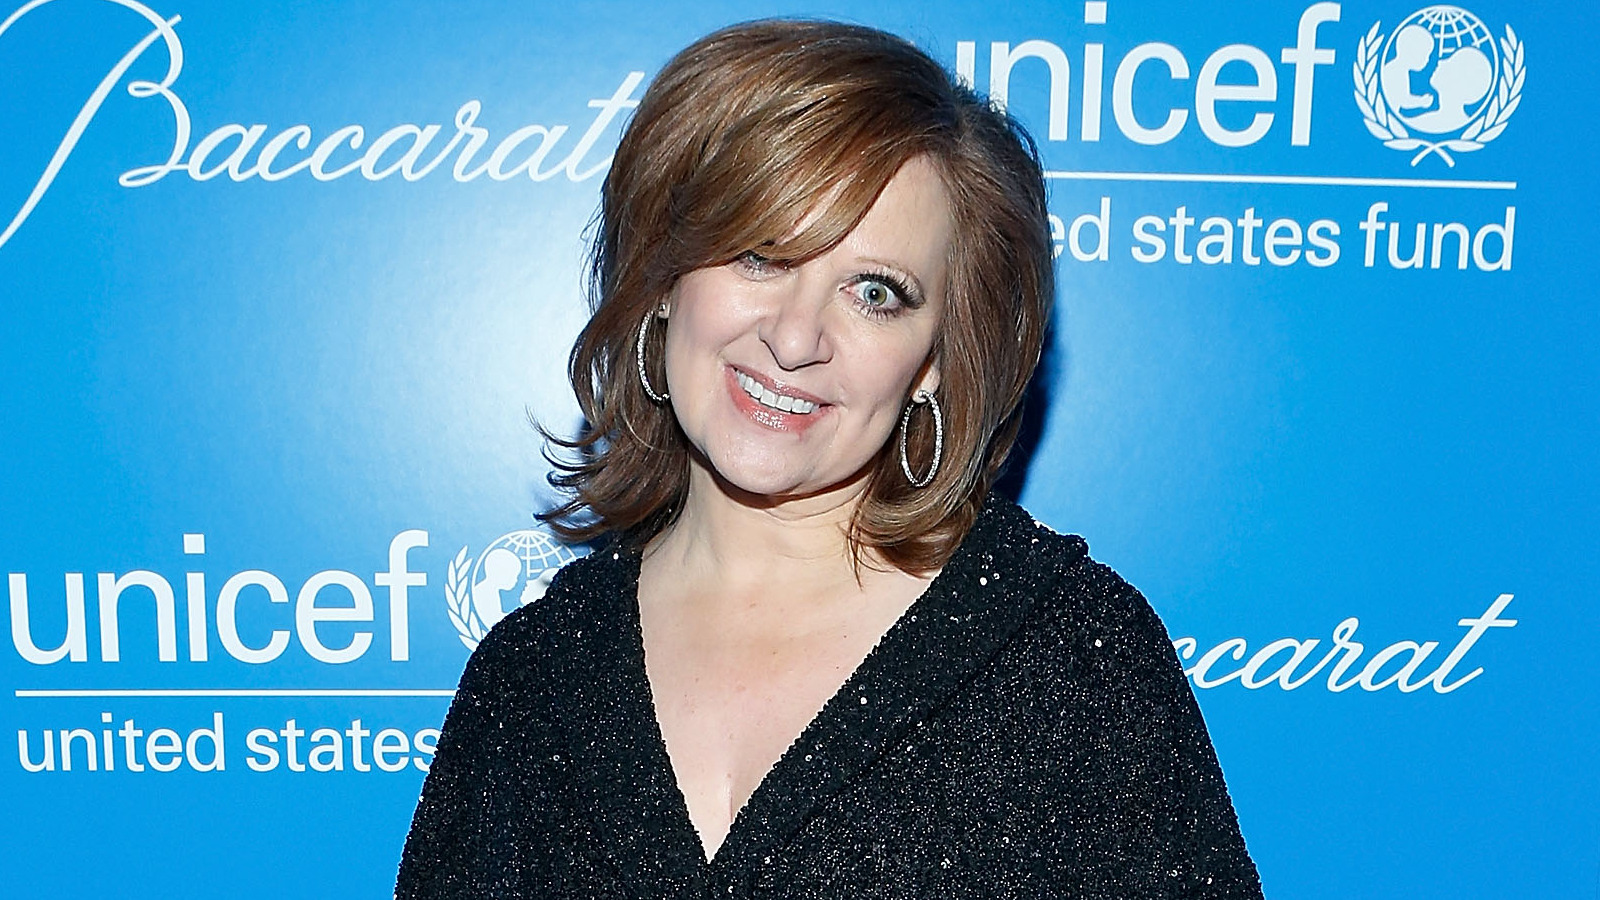 Caroline Manzo Says She's Done With 'The Real Housewives' & Will